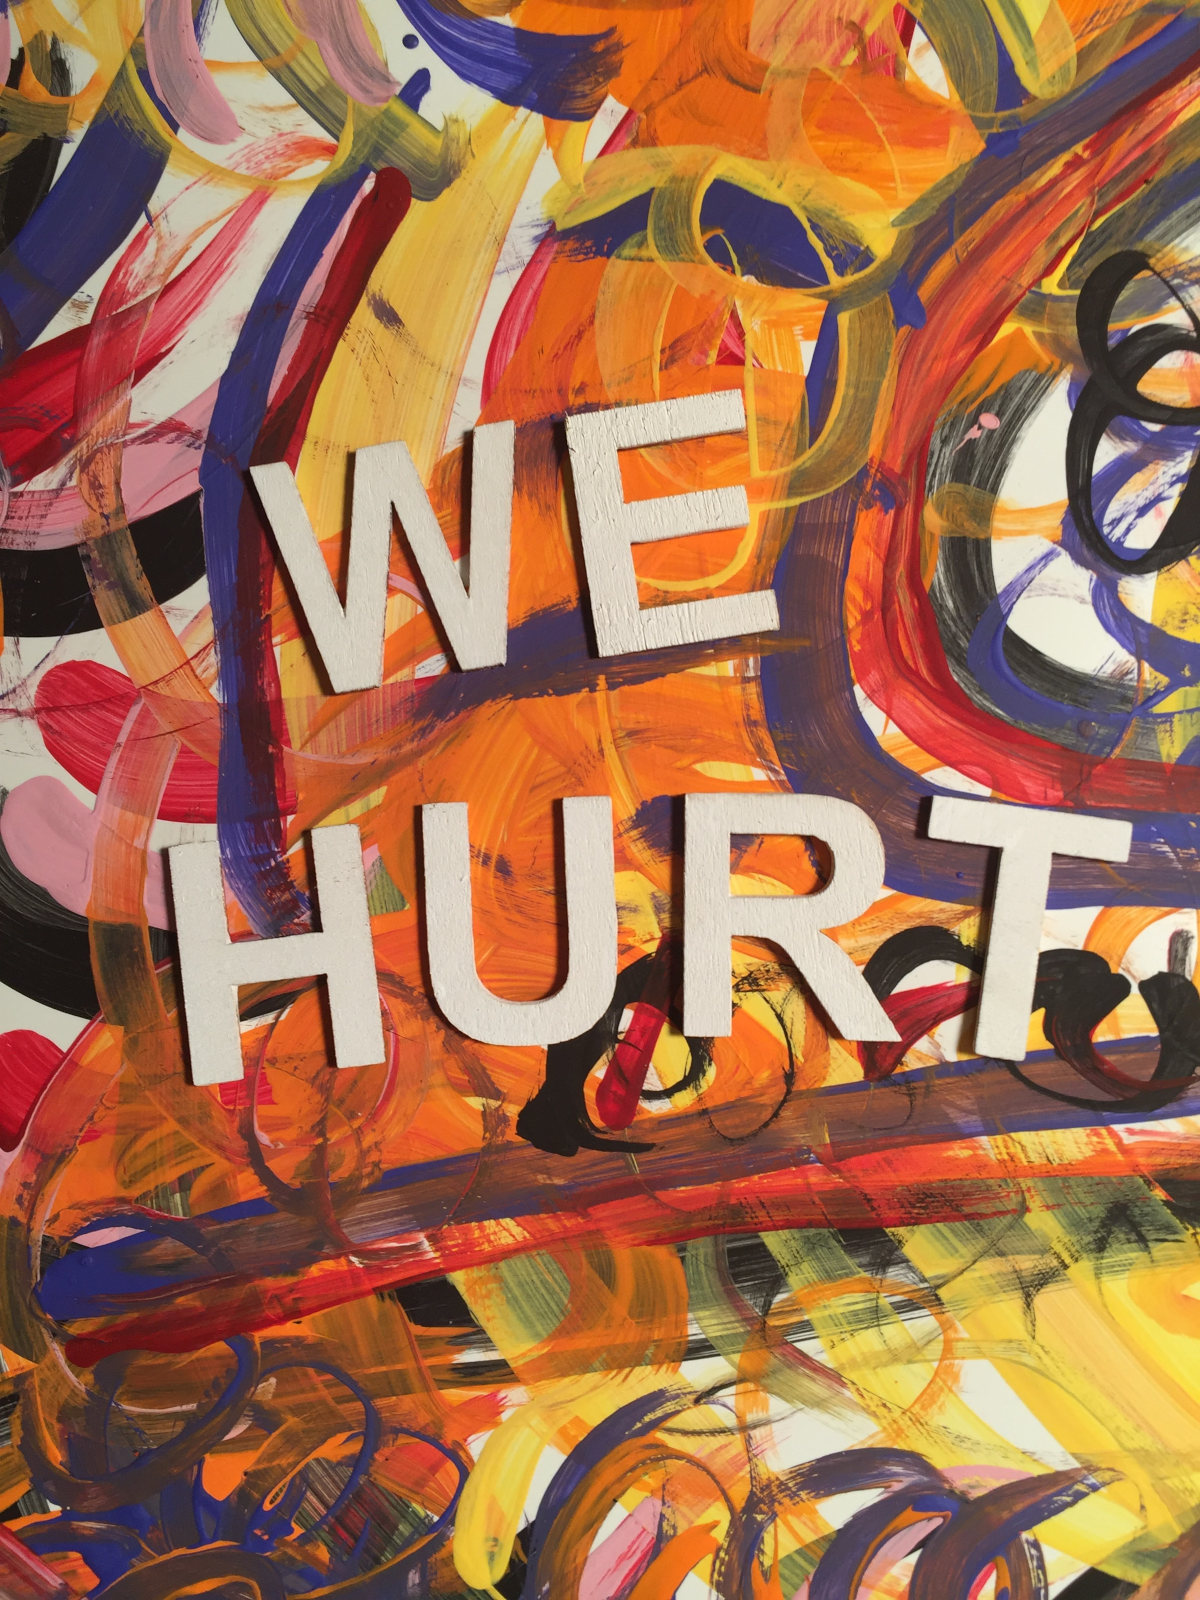 Acrylic paint on poster board plus painted wooden letters to spell 'We hurt'